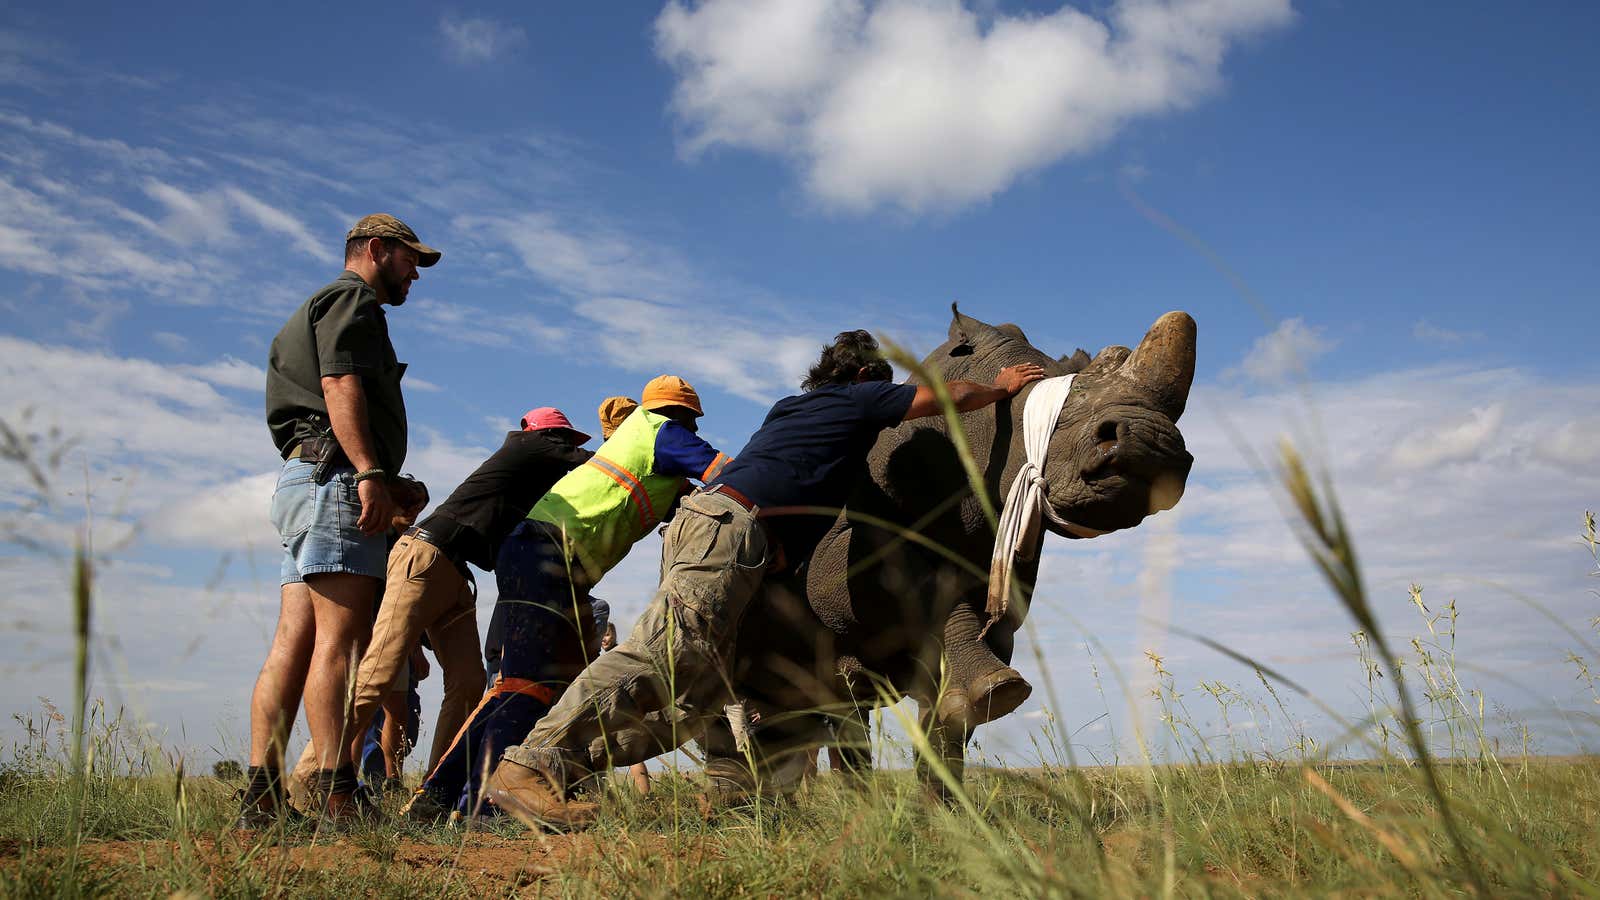 Workers attempt to bring a tranquillised black rhino to the ground before dehorning, one of a number of ways conservationists and activists are trying to deter deter the poaching of one of the world’s endangered species, at a farm outside Klerksdorp, in the north west province, South Africa, February 24, 2016.